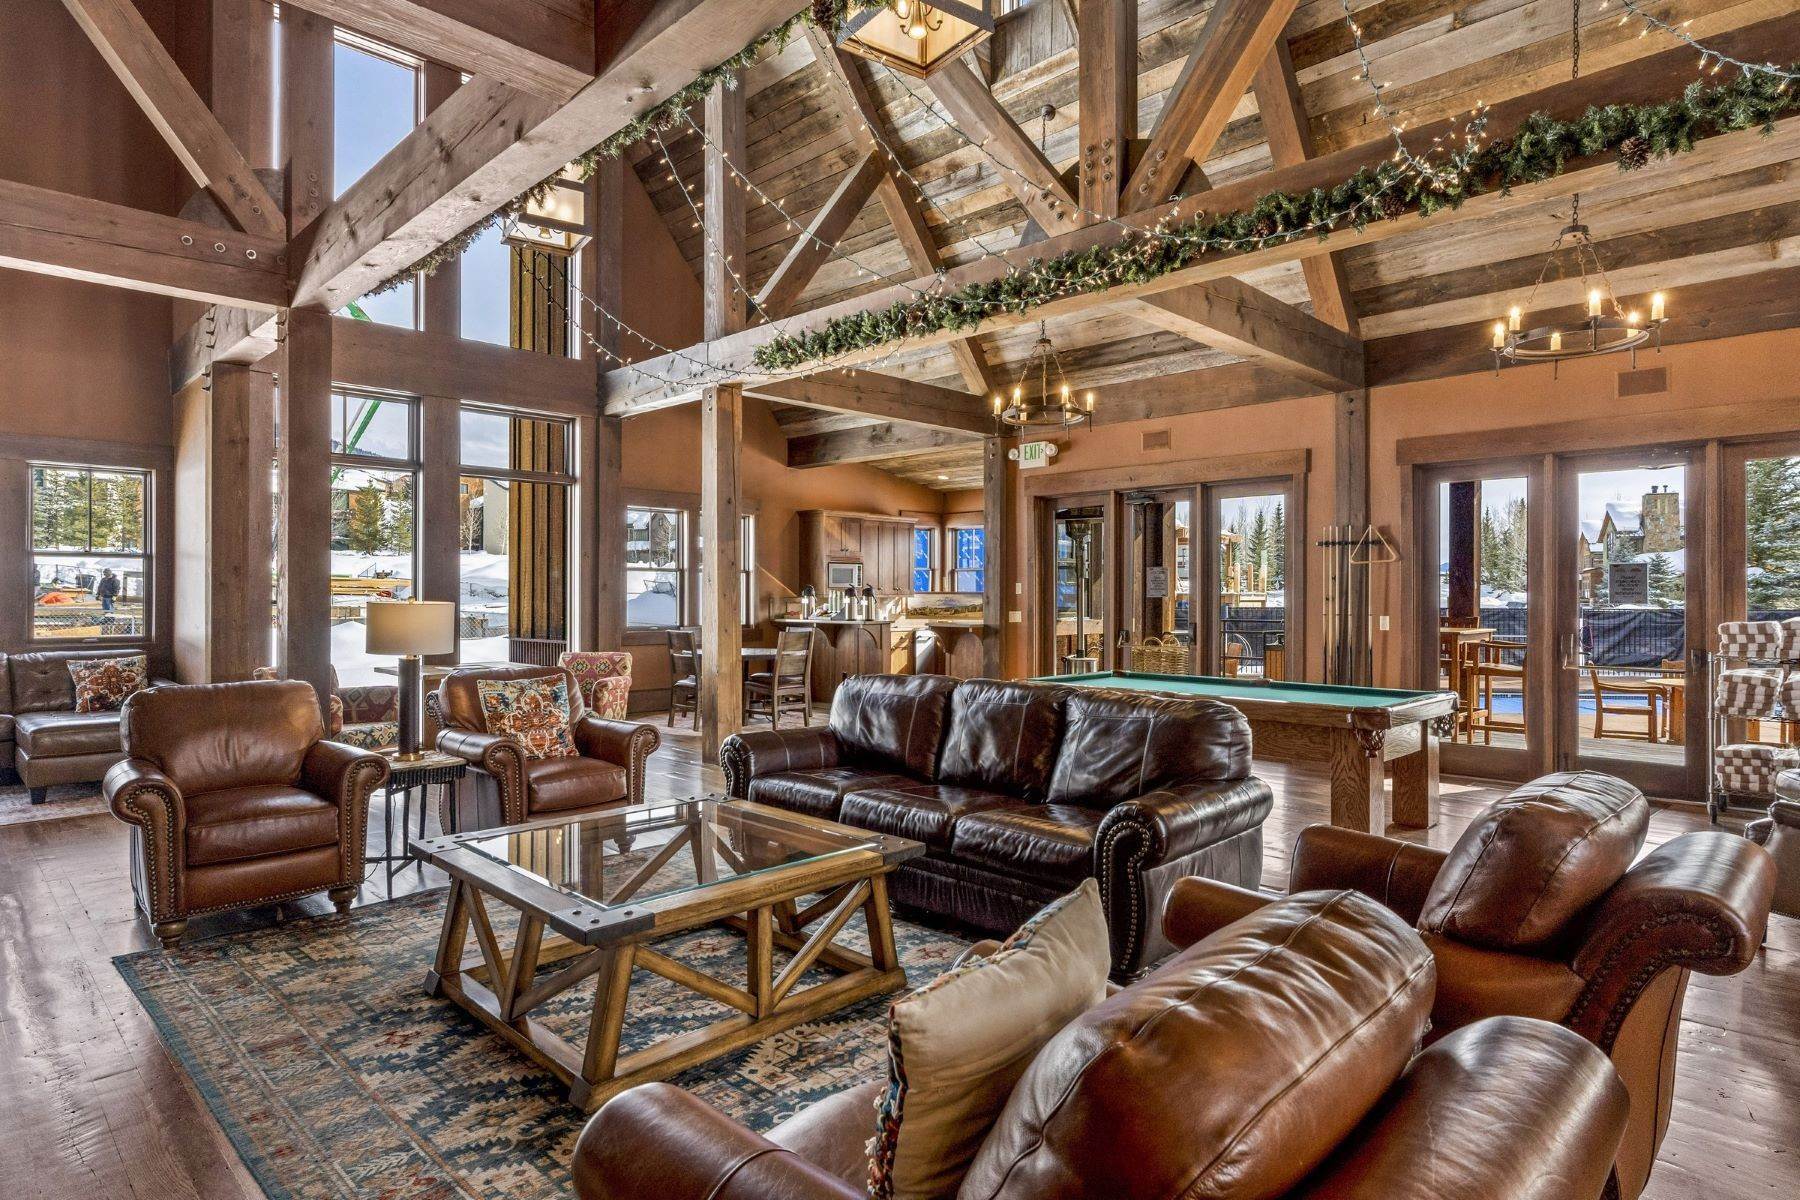 26. Fractional Ownership Property for Sale at 1331 Turning Leaf Court, Steamboat Springs, CO, 80487 1331 Turning Leaf Court Steamboat Springs, Colorado 80487 United States